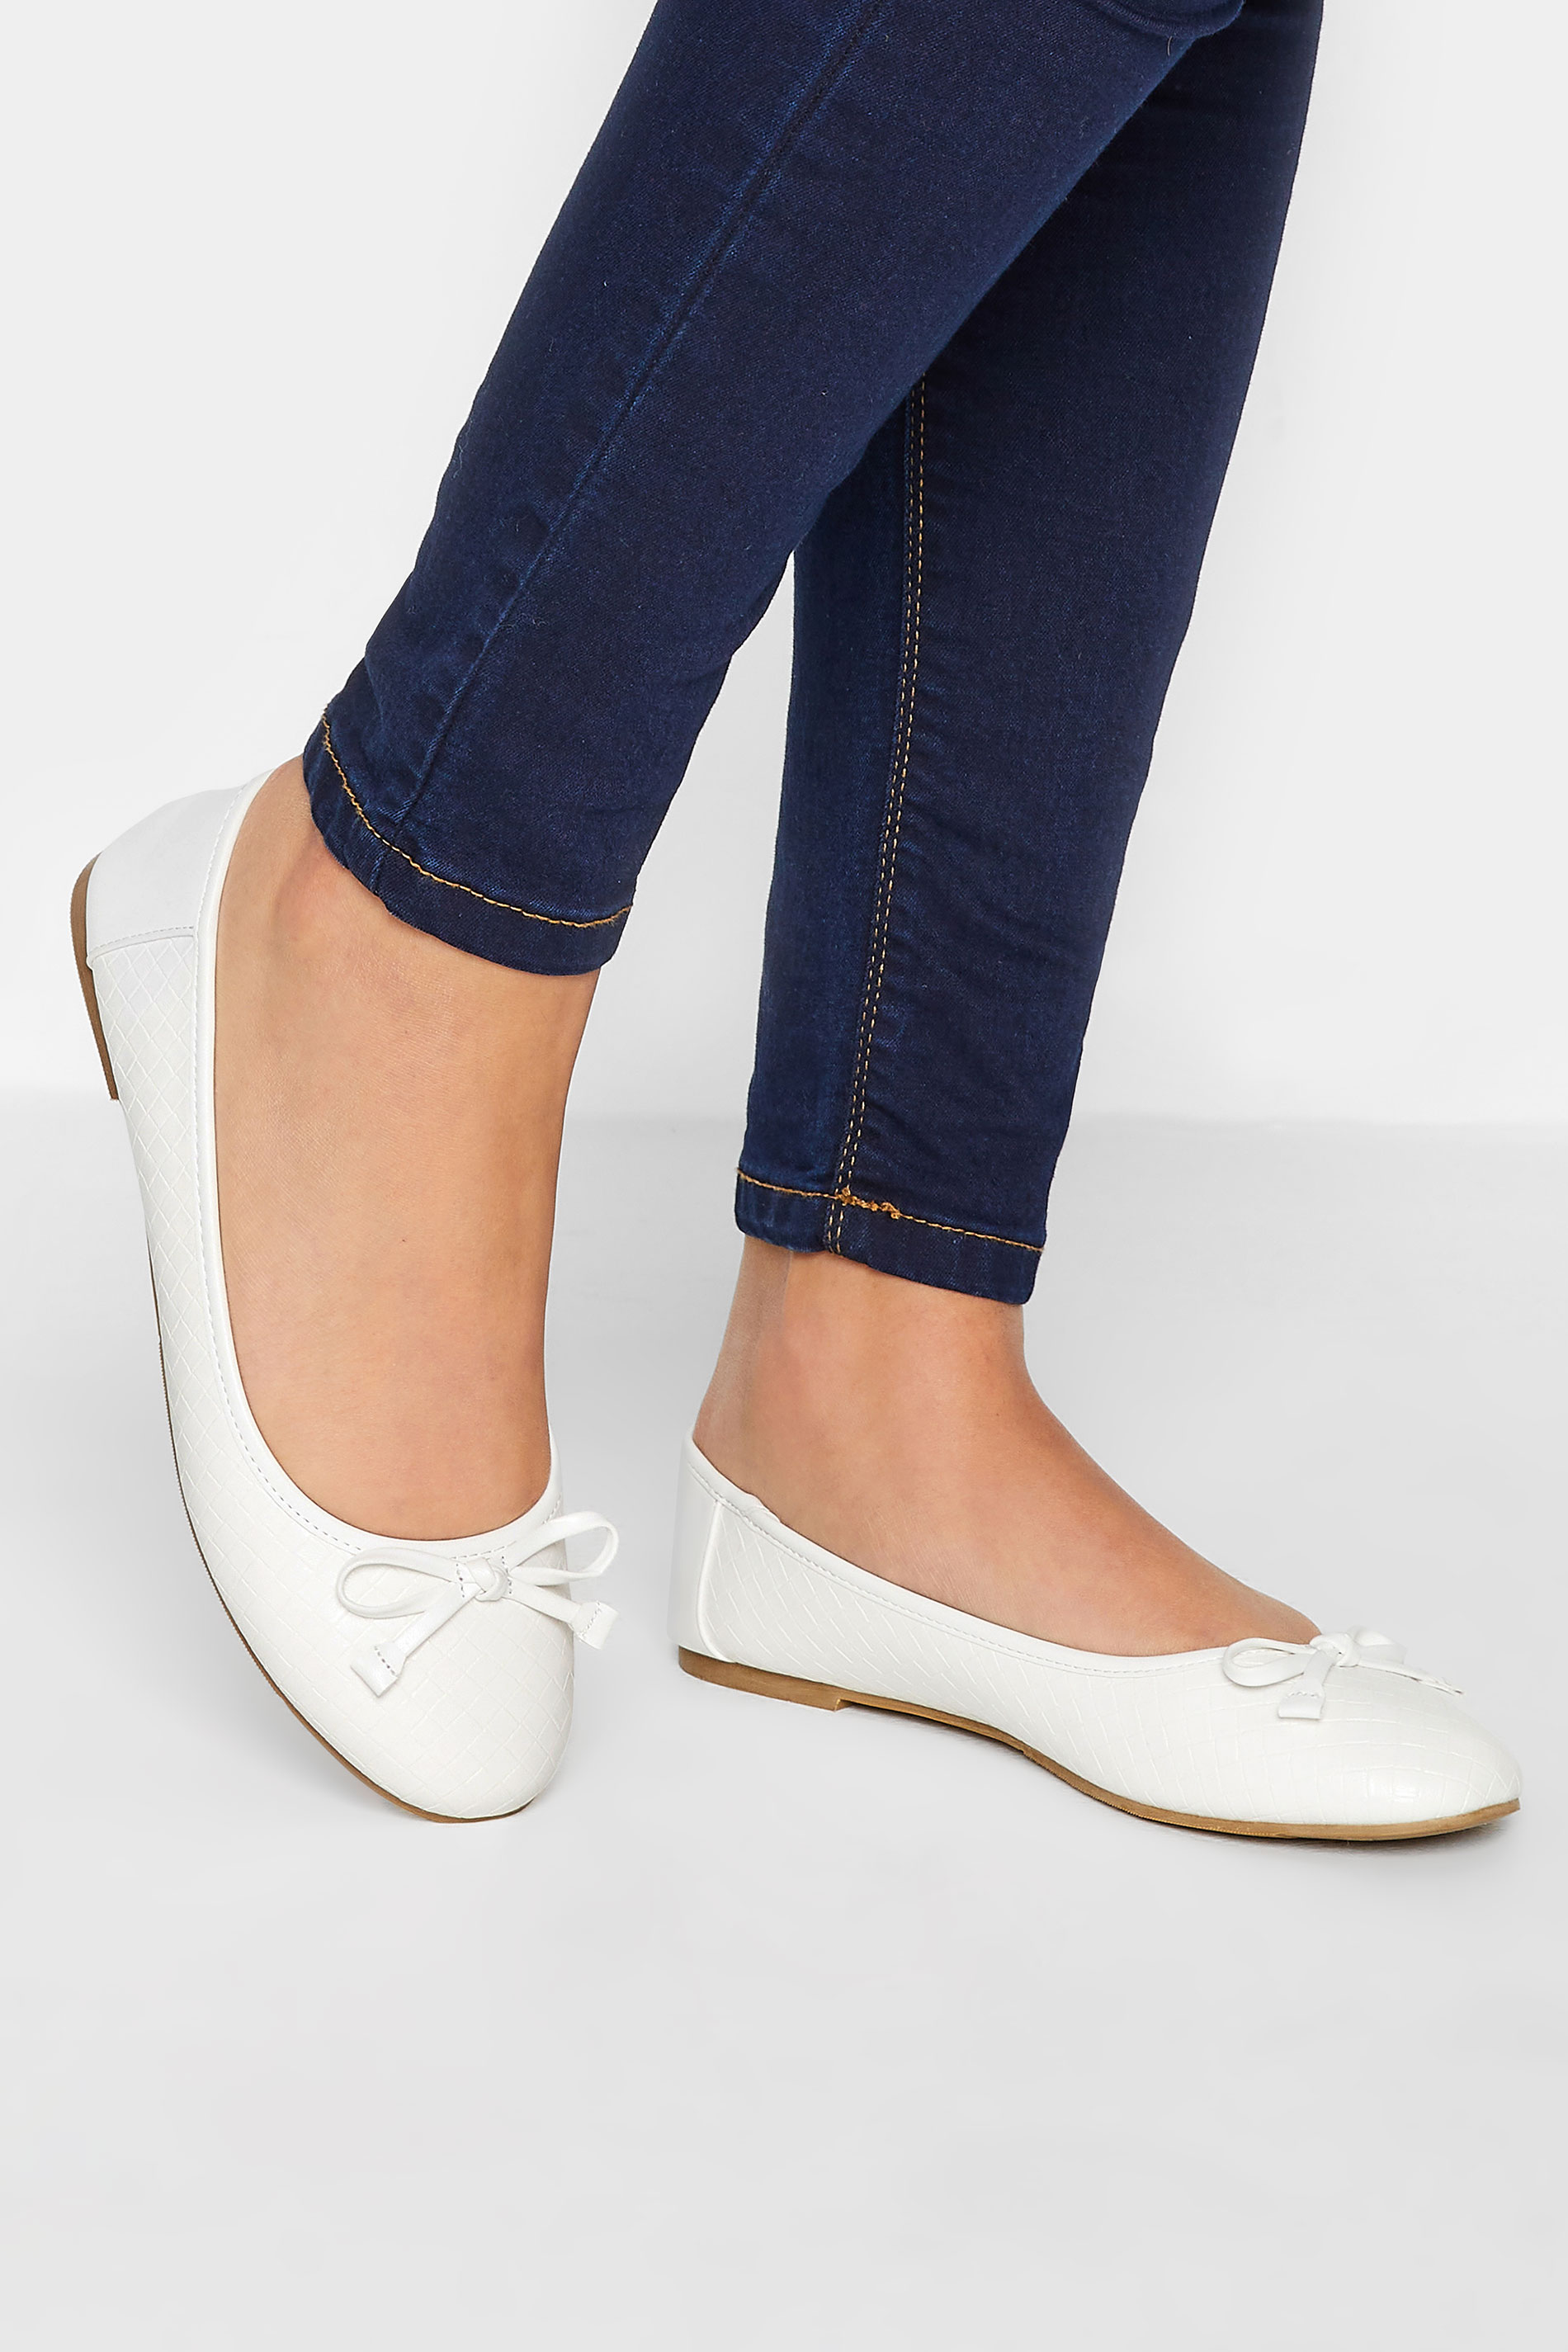 LTS White Woven Ballerina Pumps In Standard Fit | Long Tall Sally 1